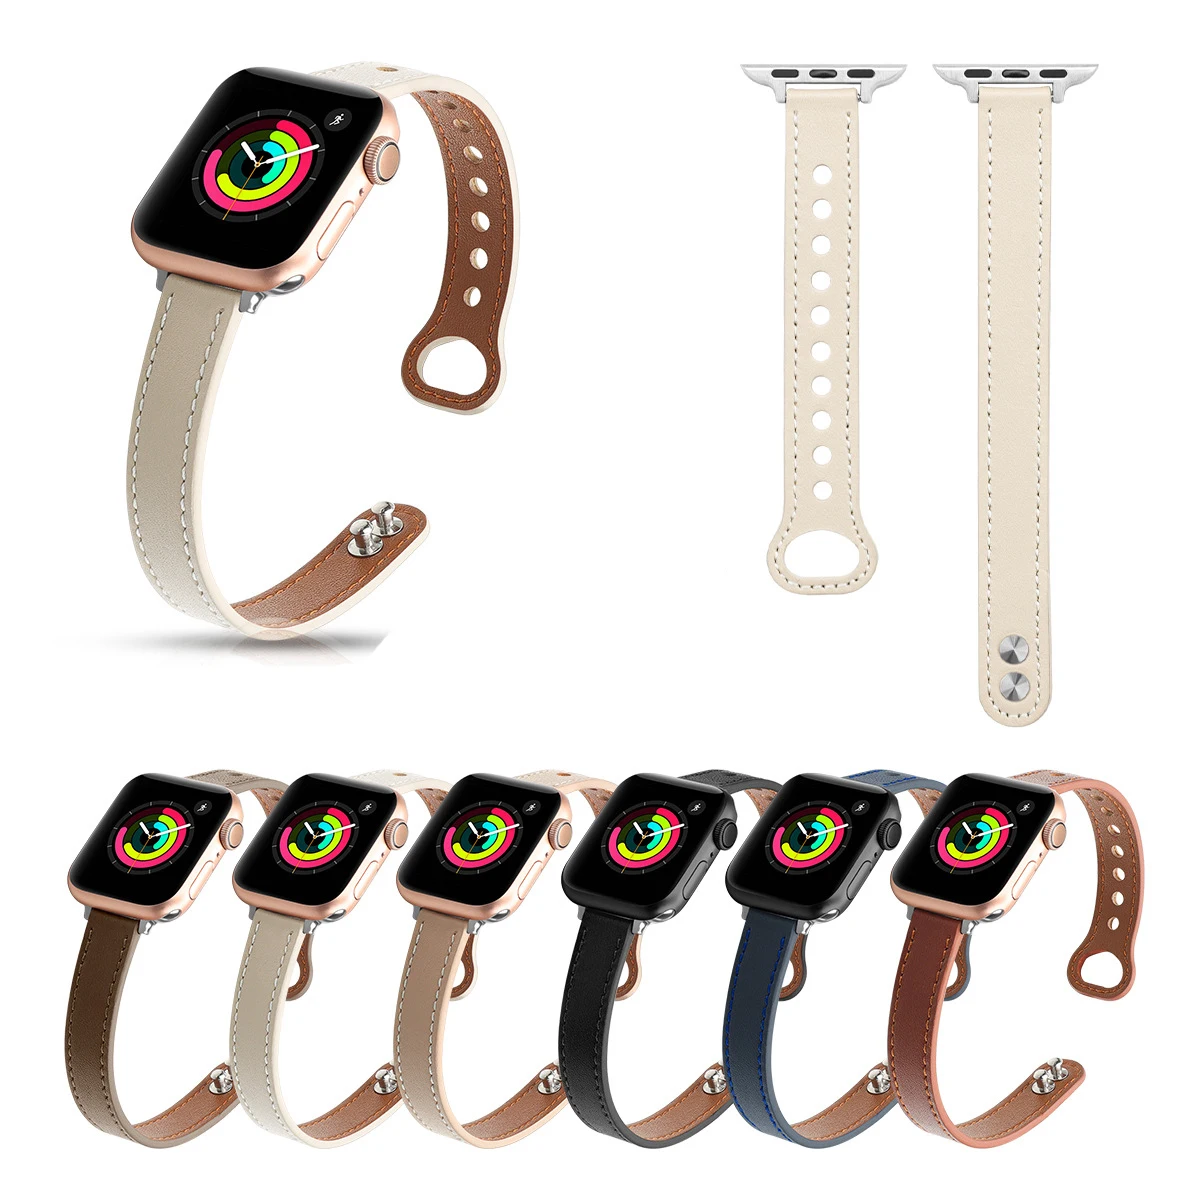 

Women Girl Thin Correa Wrist for Apple Watch Band Slim Leather Strap for iwatch Series 6 5 4 3 2 se Bands